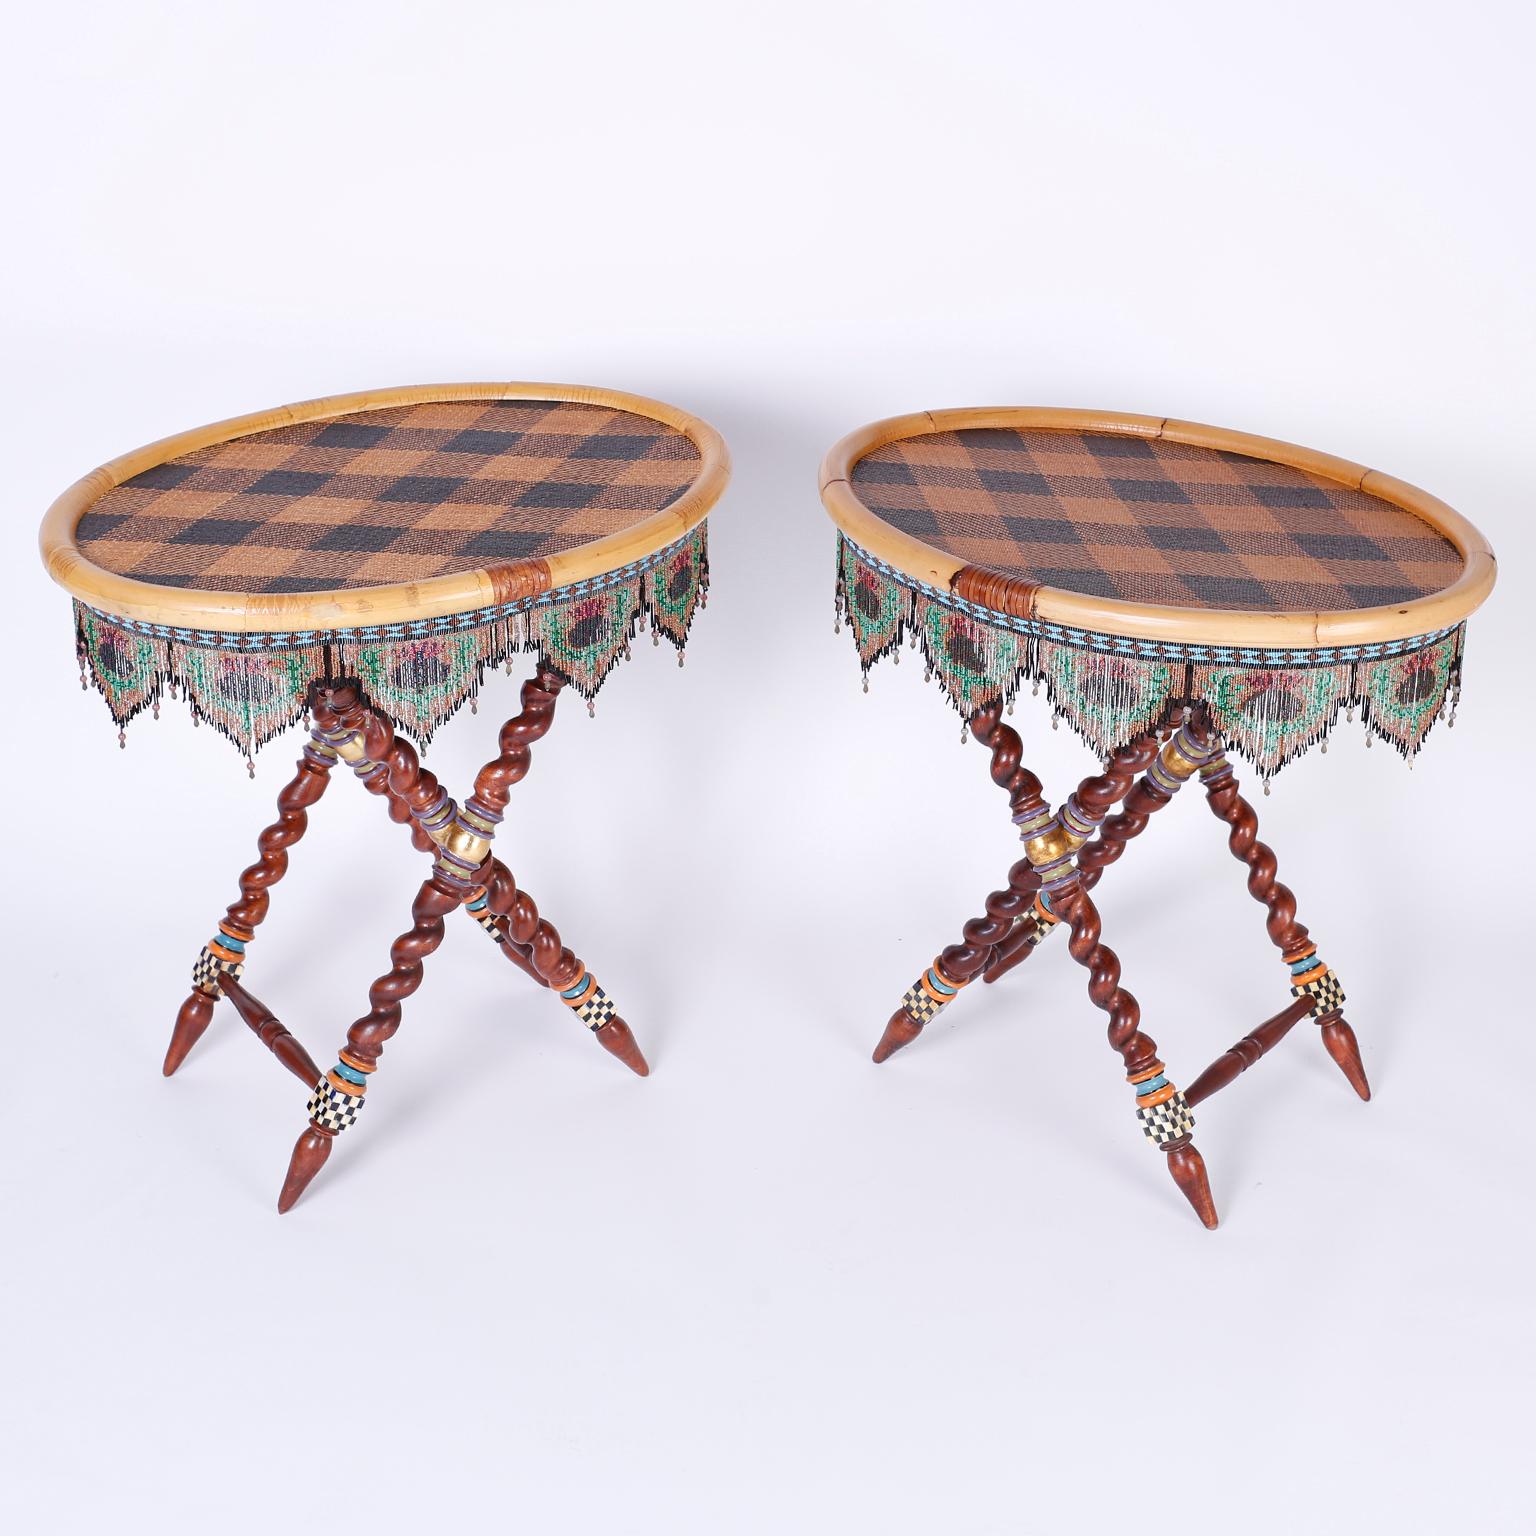 Pair of whimsical collapsible serving tray top or end tables with argyle wicker surfaces bordered with bamboo and glass bead fringe. The carved wood stands have barley twist legs with unexpected painted decorations. Branded Mackenzie-Childs on the